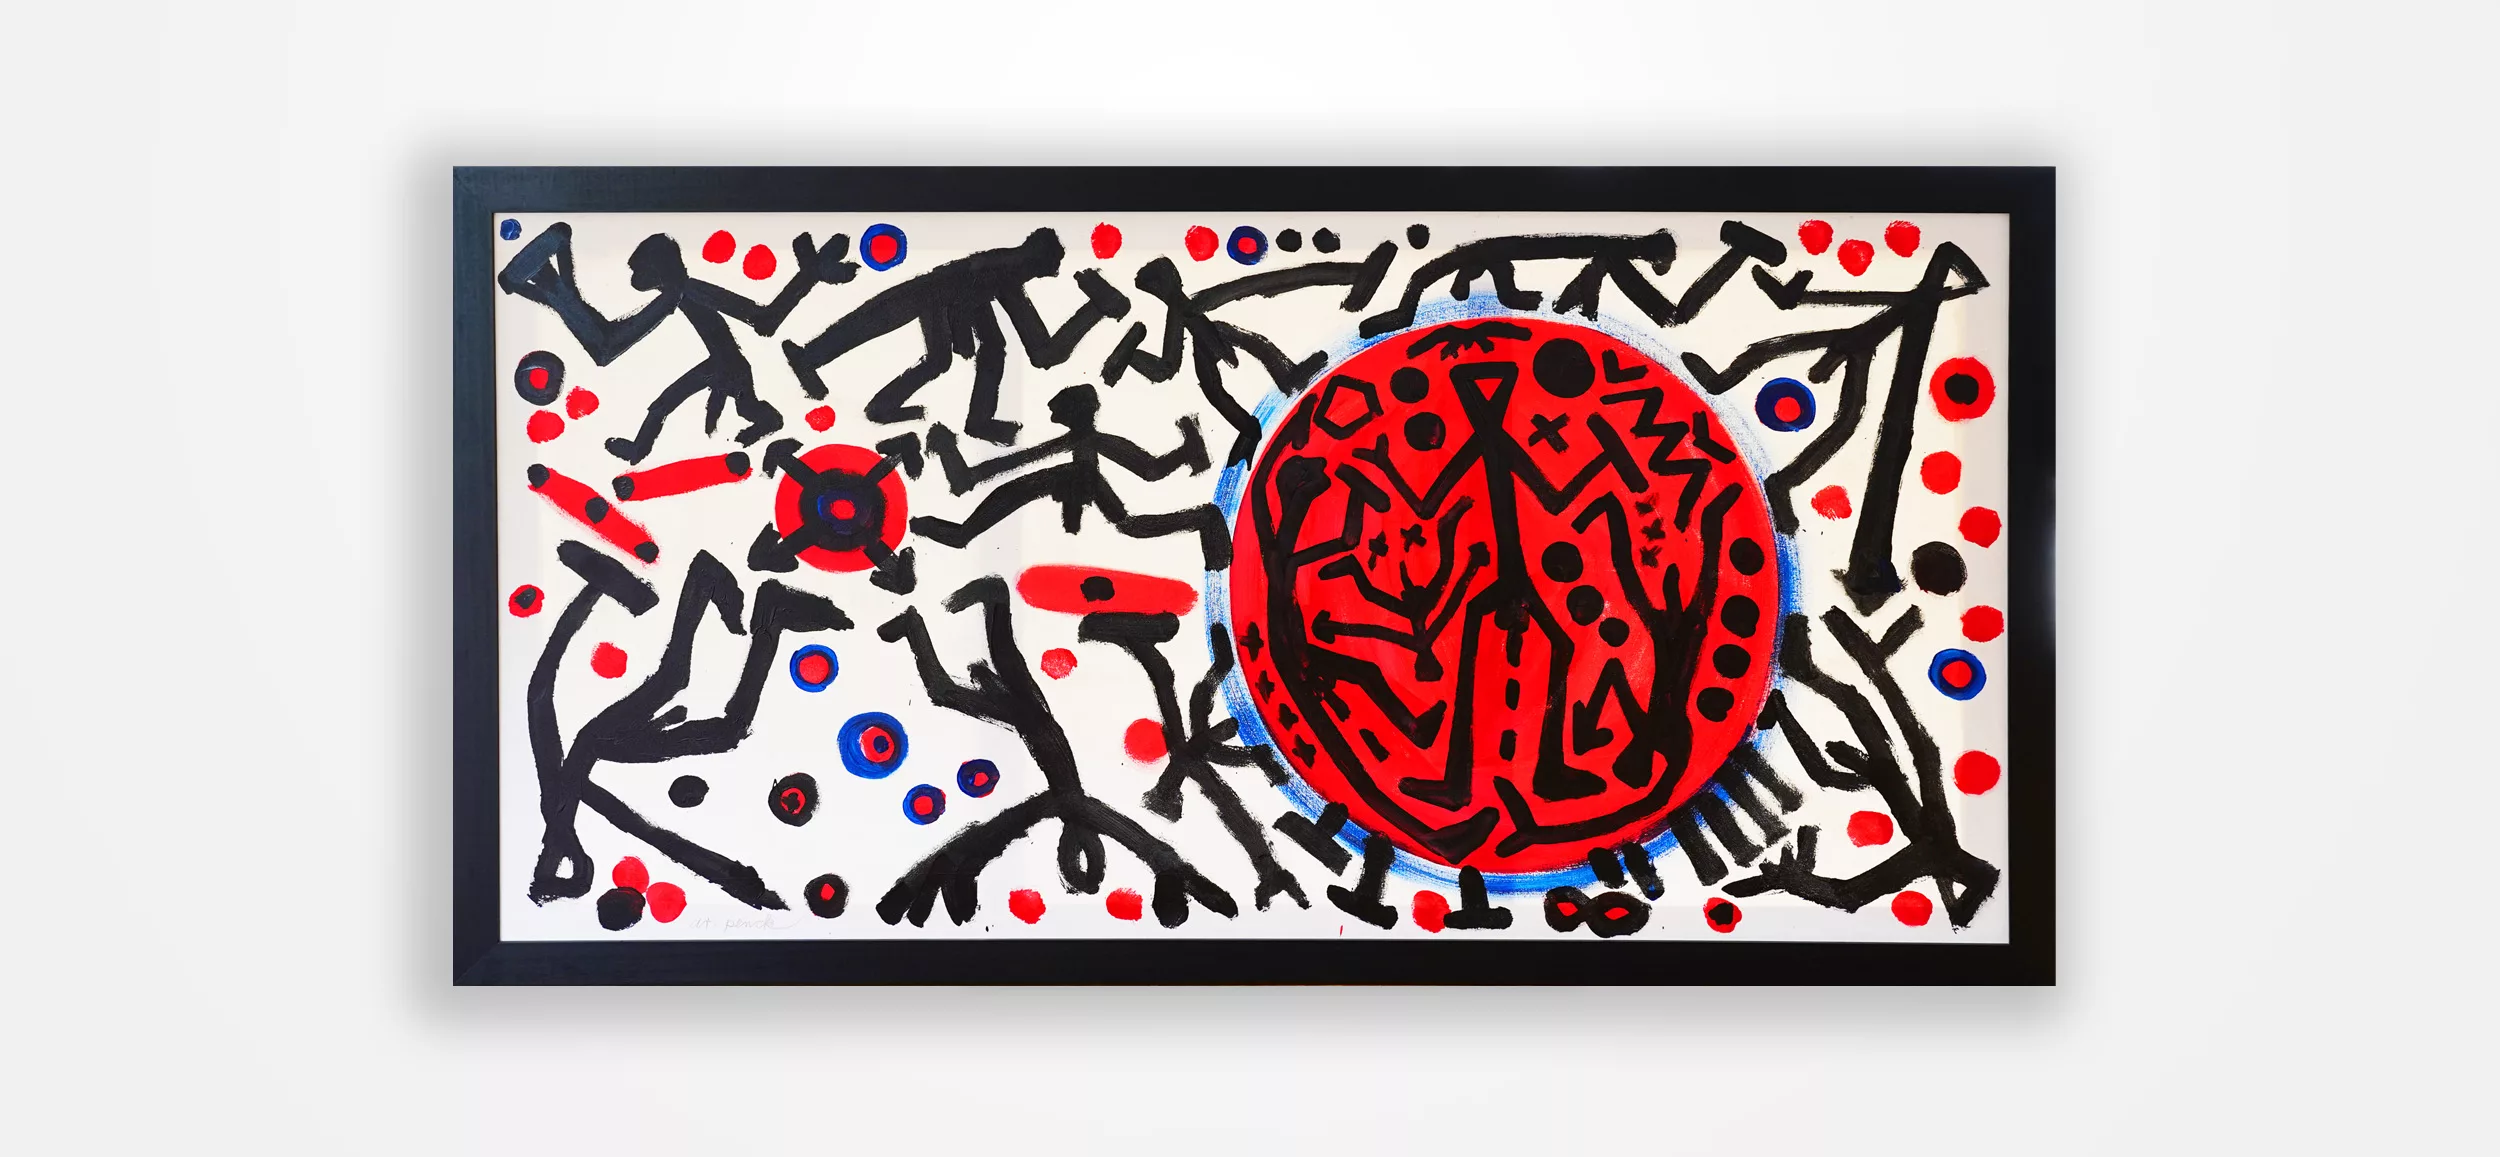 A.R. Penck: A artist at the intersection of expressionism and pop art